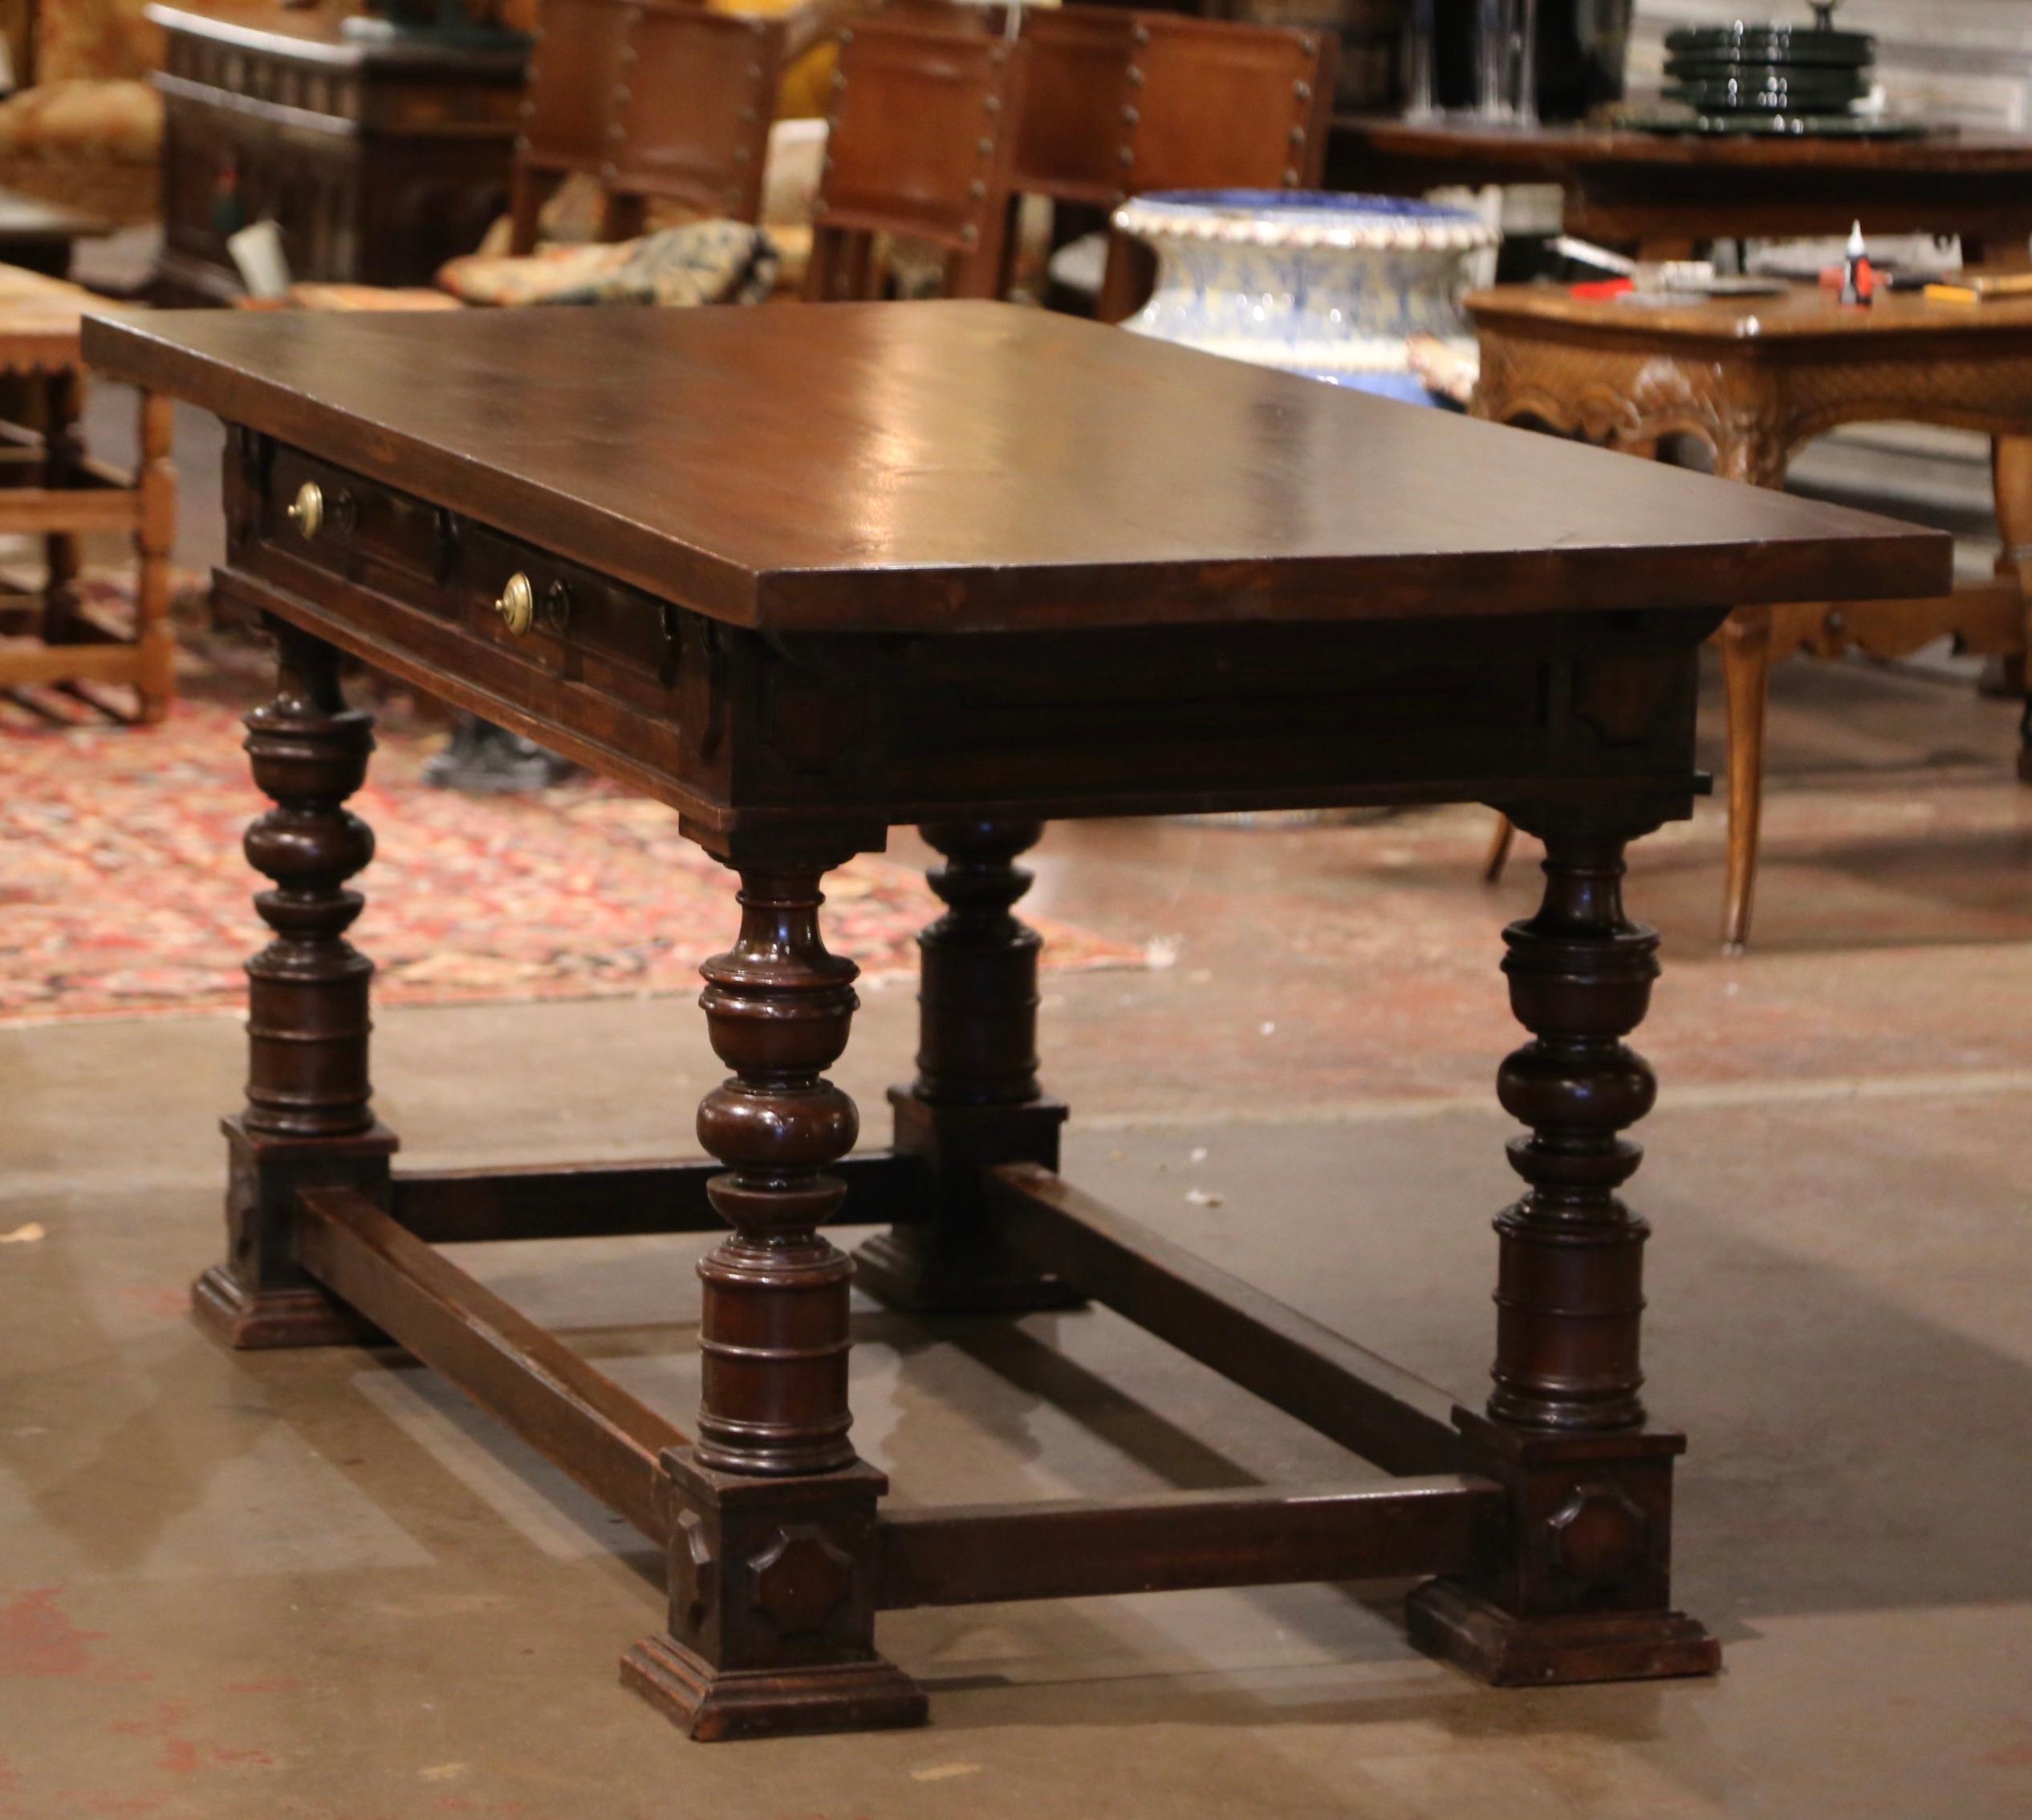 Crafted in the Perigord region of France, circa 1860, the antique writing table stands on thick carved turned legs ending with square feet, and embellished with an elegant rectangular box stretcher at the base. The large table features two paneled